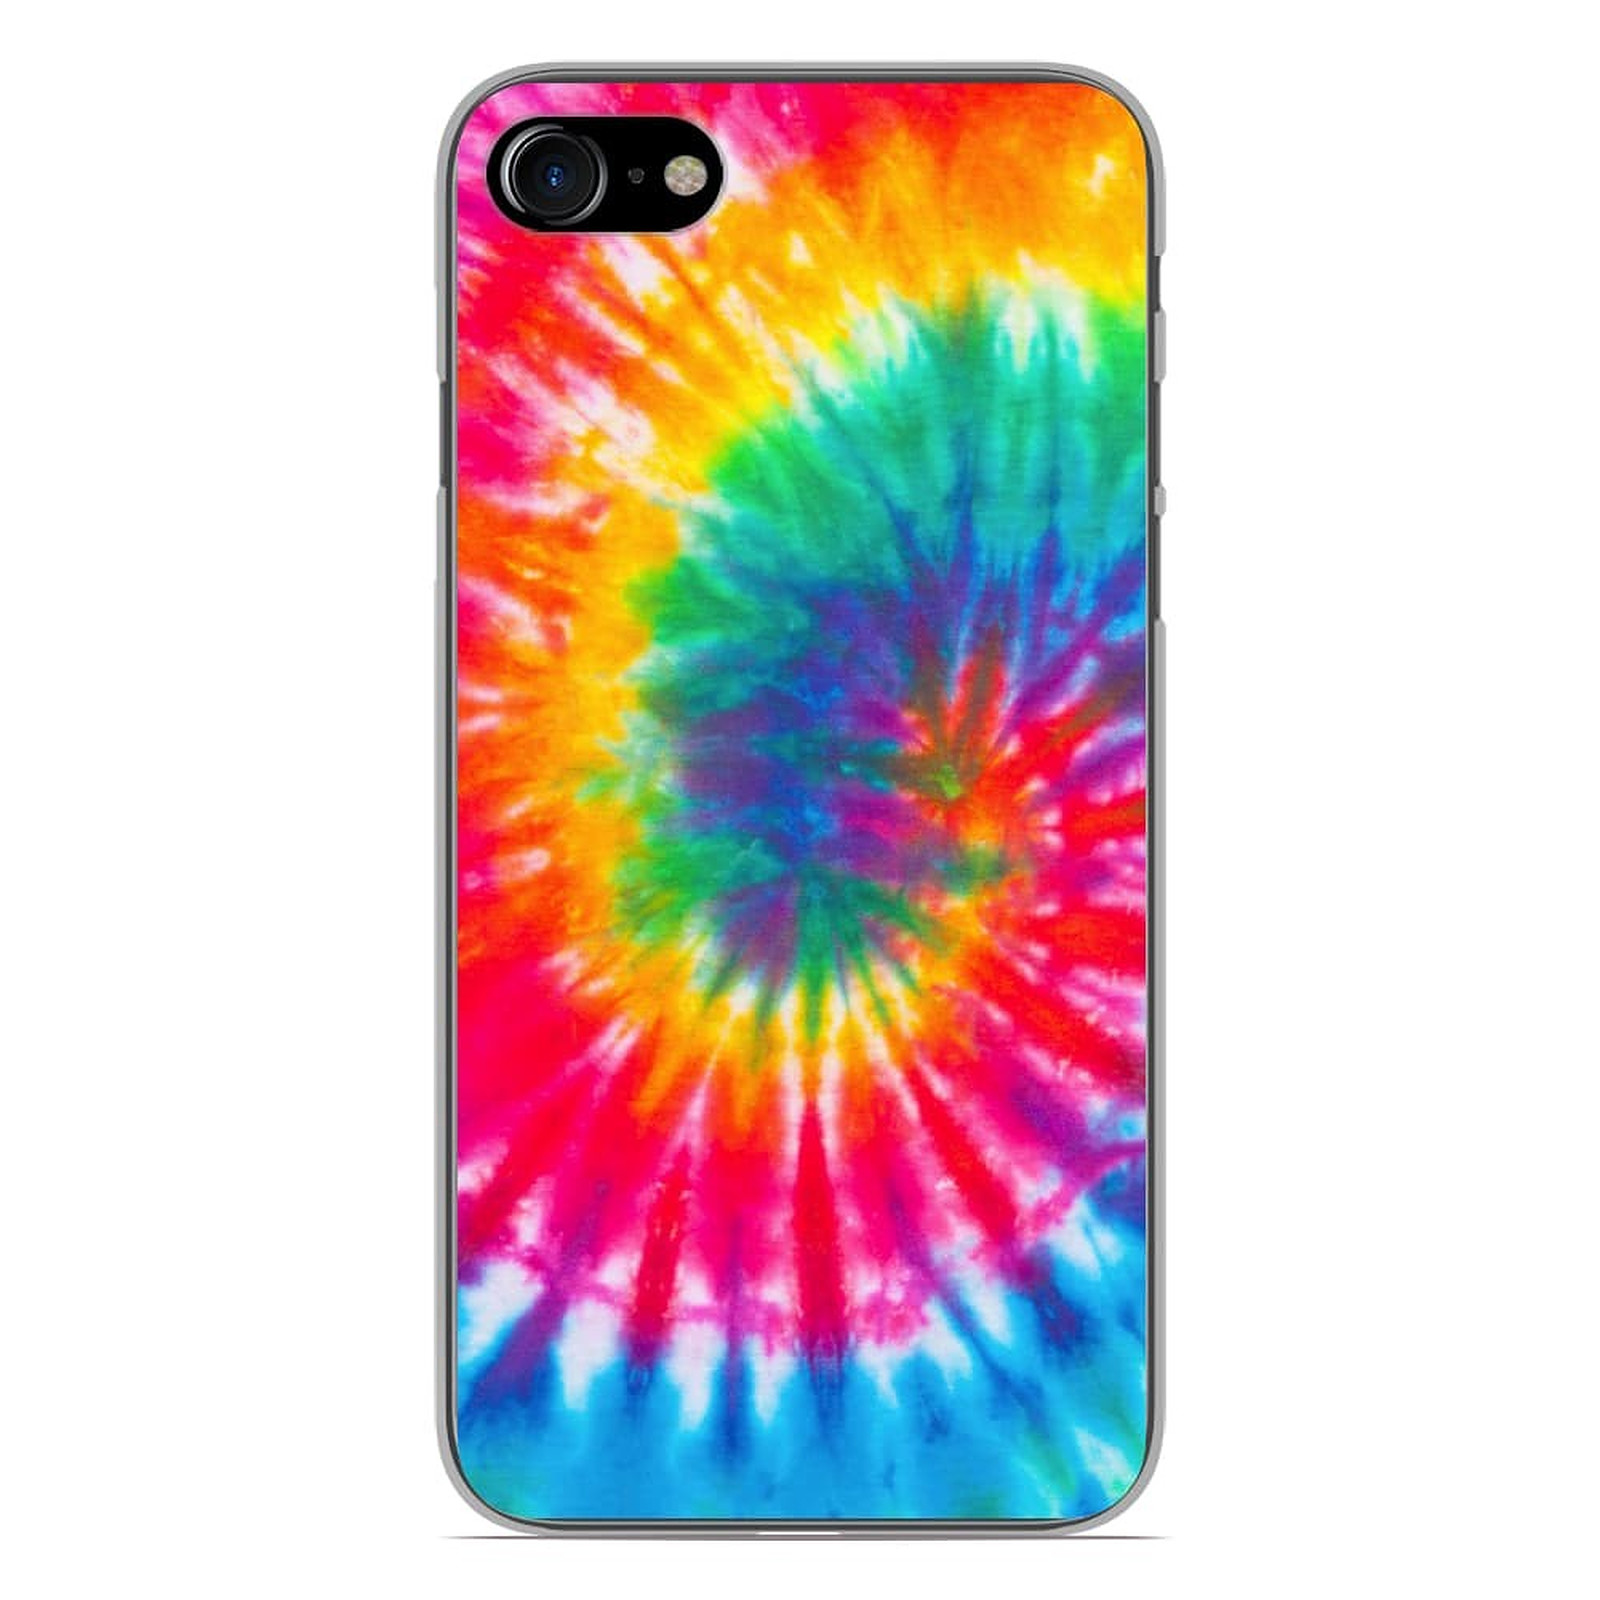 1001 Coques Coque silicone gel Apple iPhone 8 motif Tie Dye Spirale - Coque telephone 1001Coques